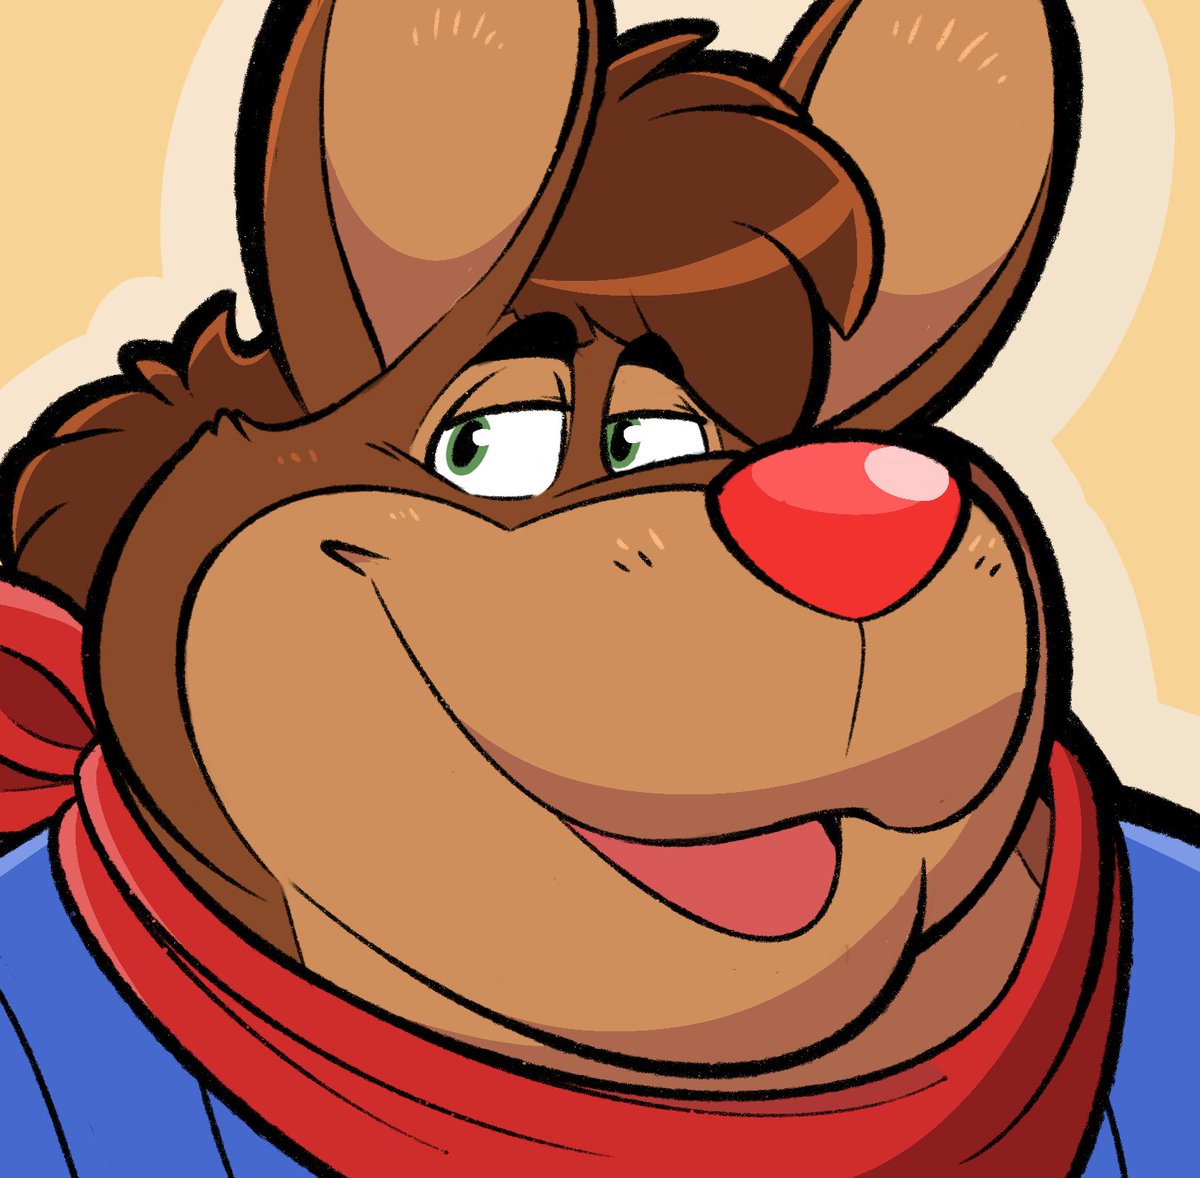 Lookin' good, buddy! Sirus icon for @RedNosedRoo